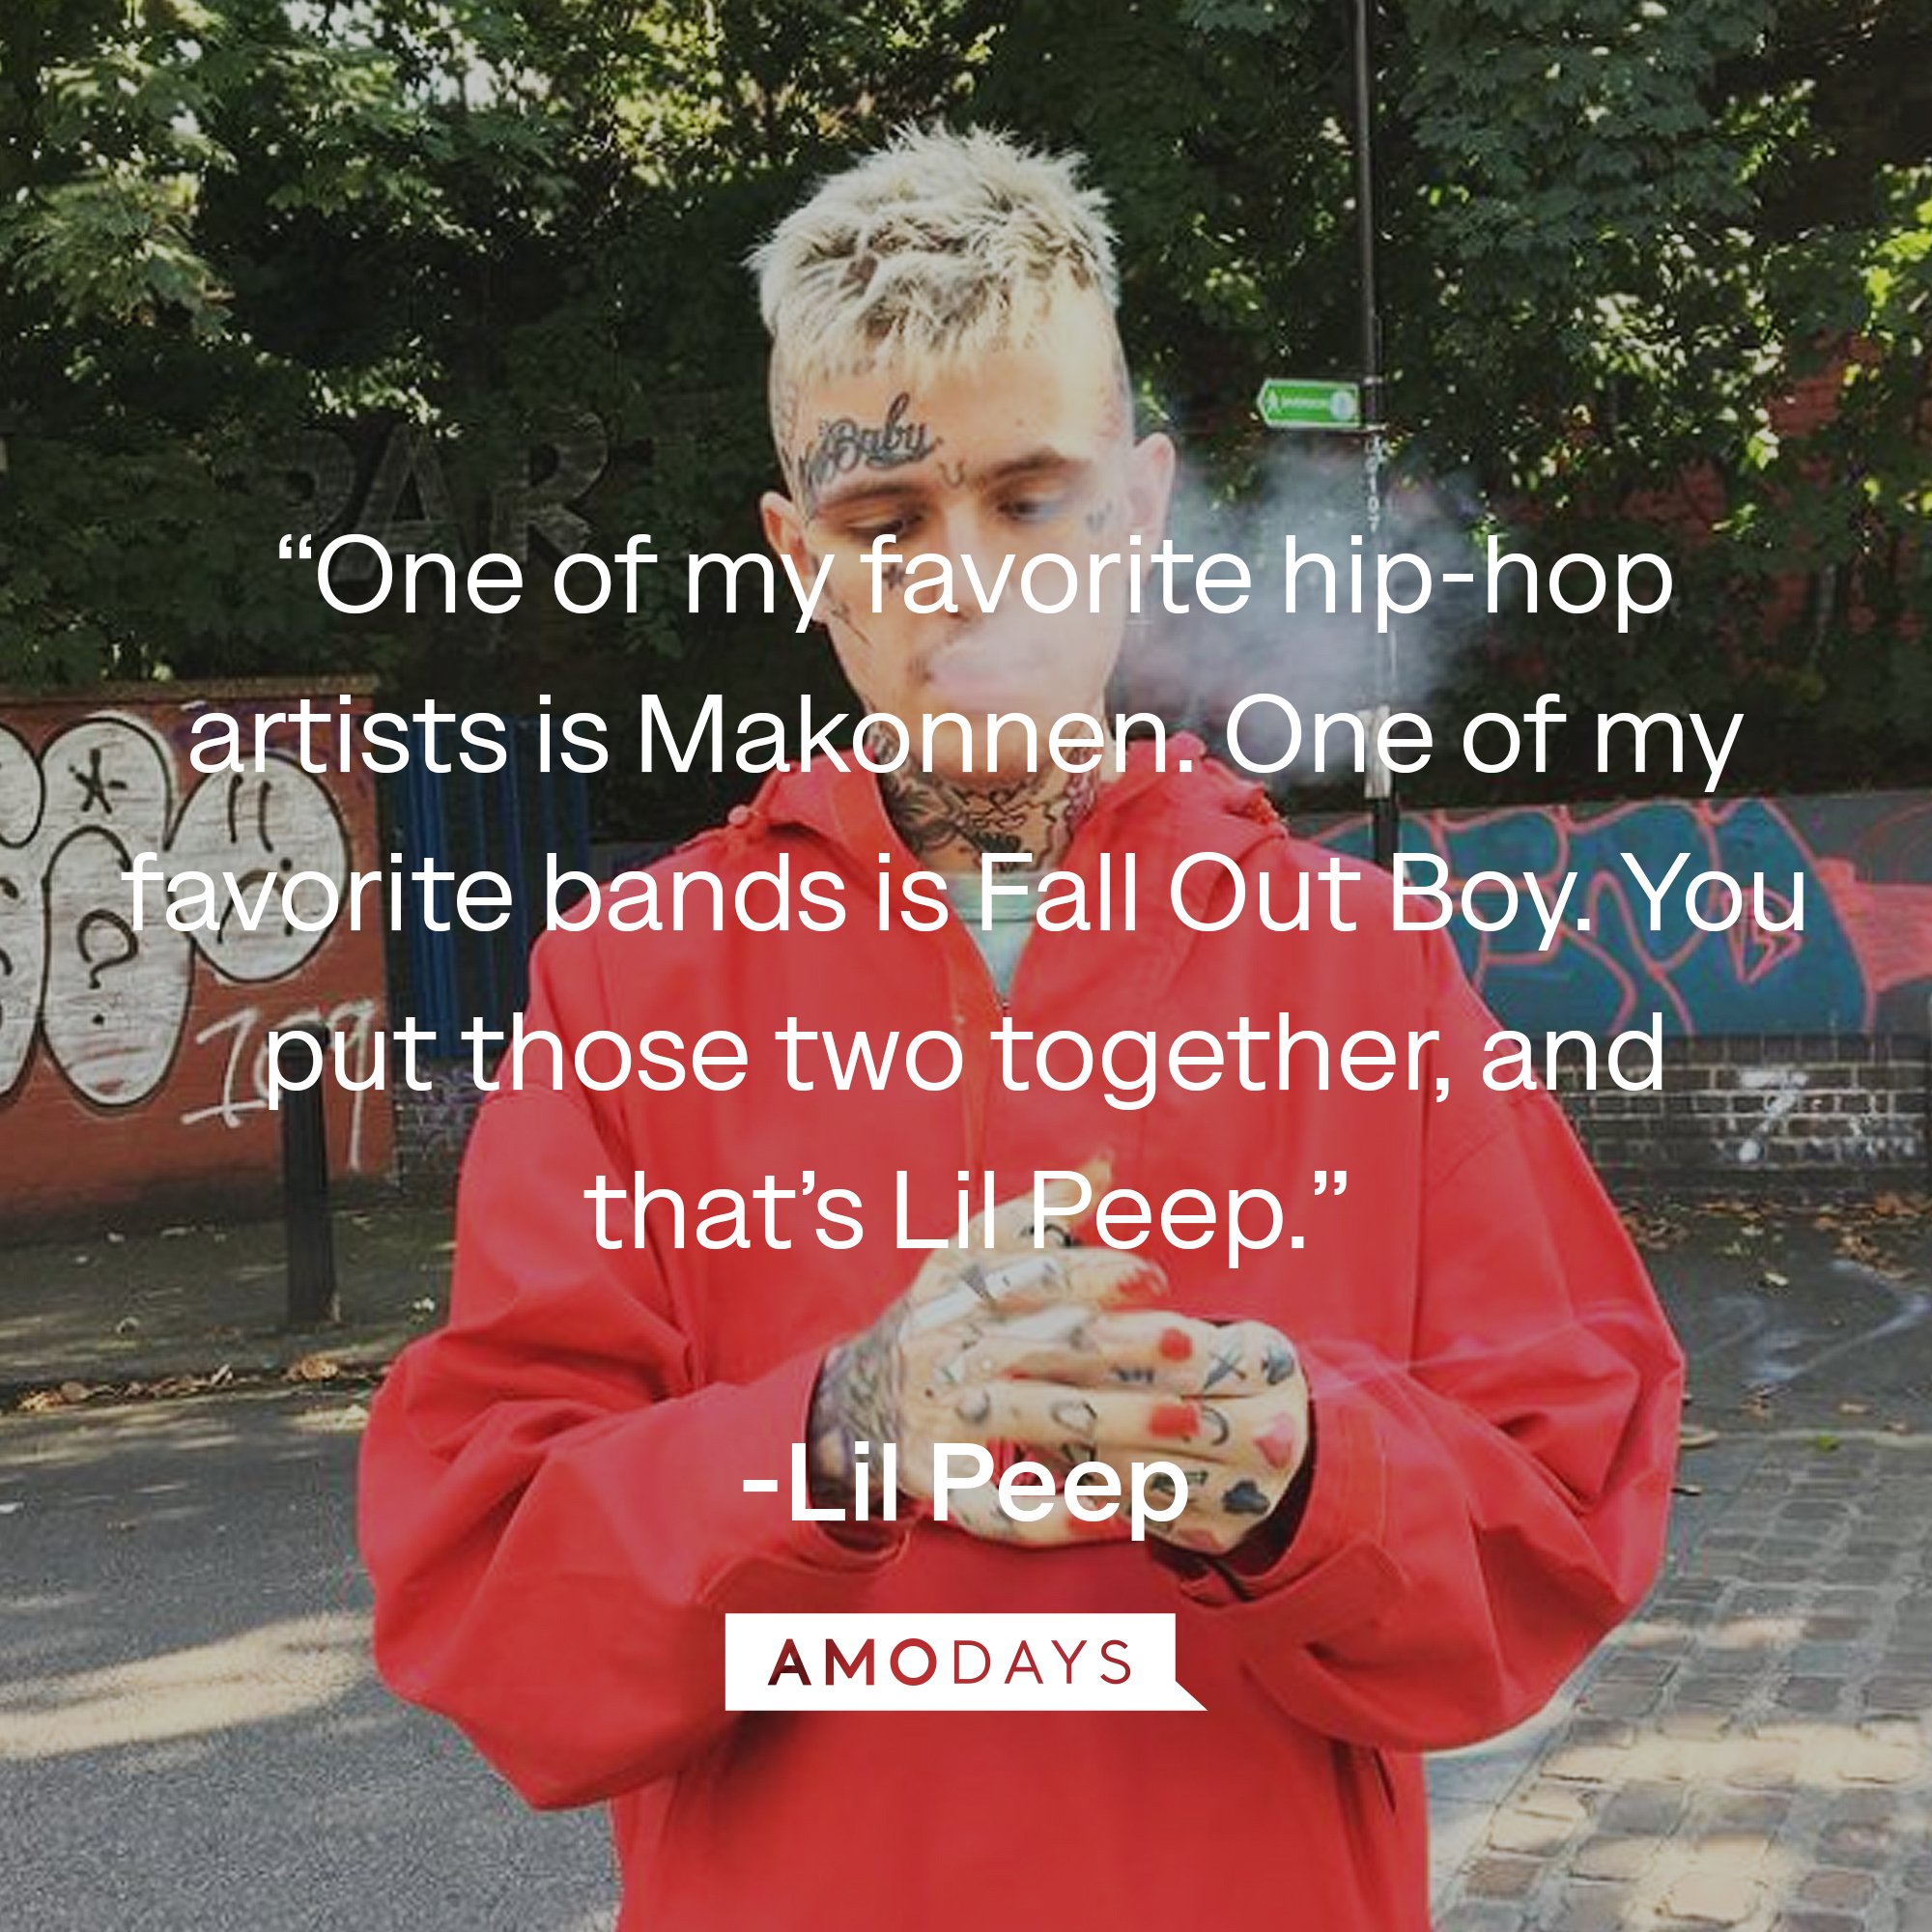 Lil Peep's quote:  “One of my favorite hip-hop artists is Makonnen. One of my favorite bands is Fall Out Boy. You put those two together, and that’s Lil Peep.” | Image: AmoDays